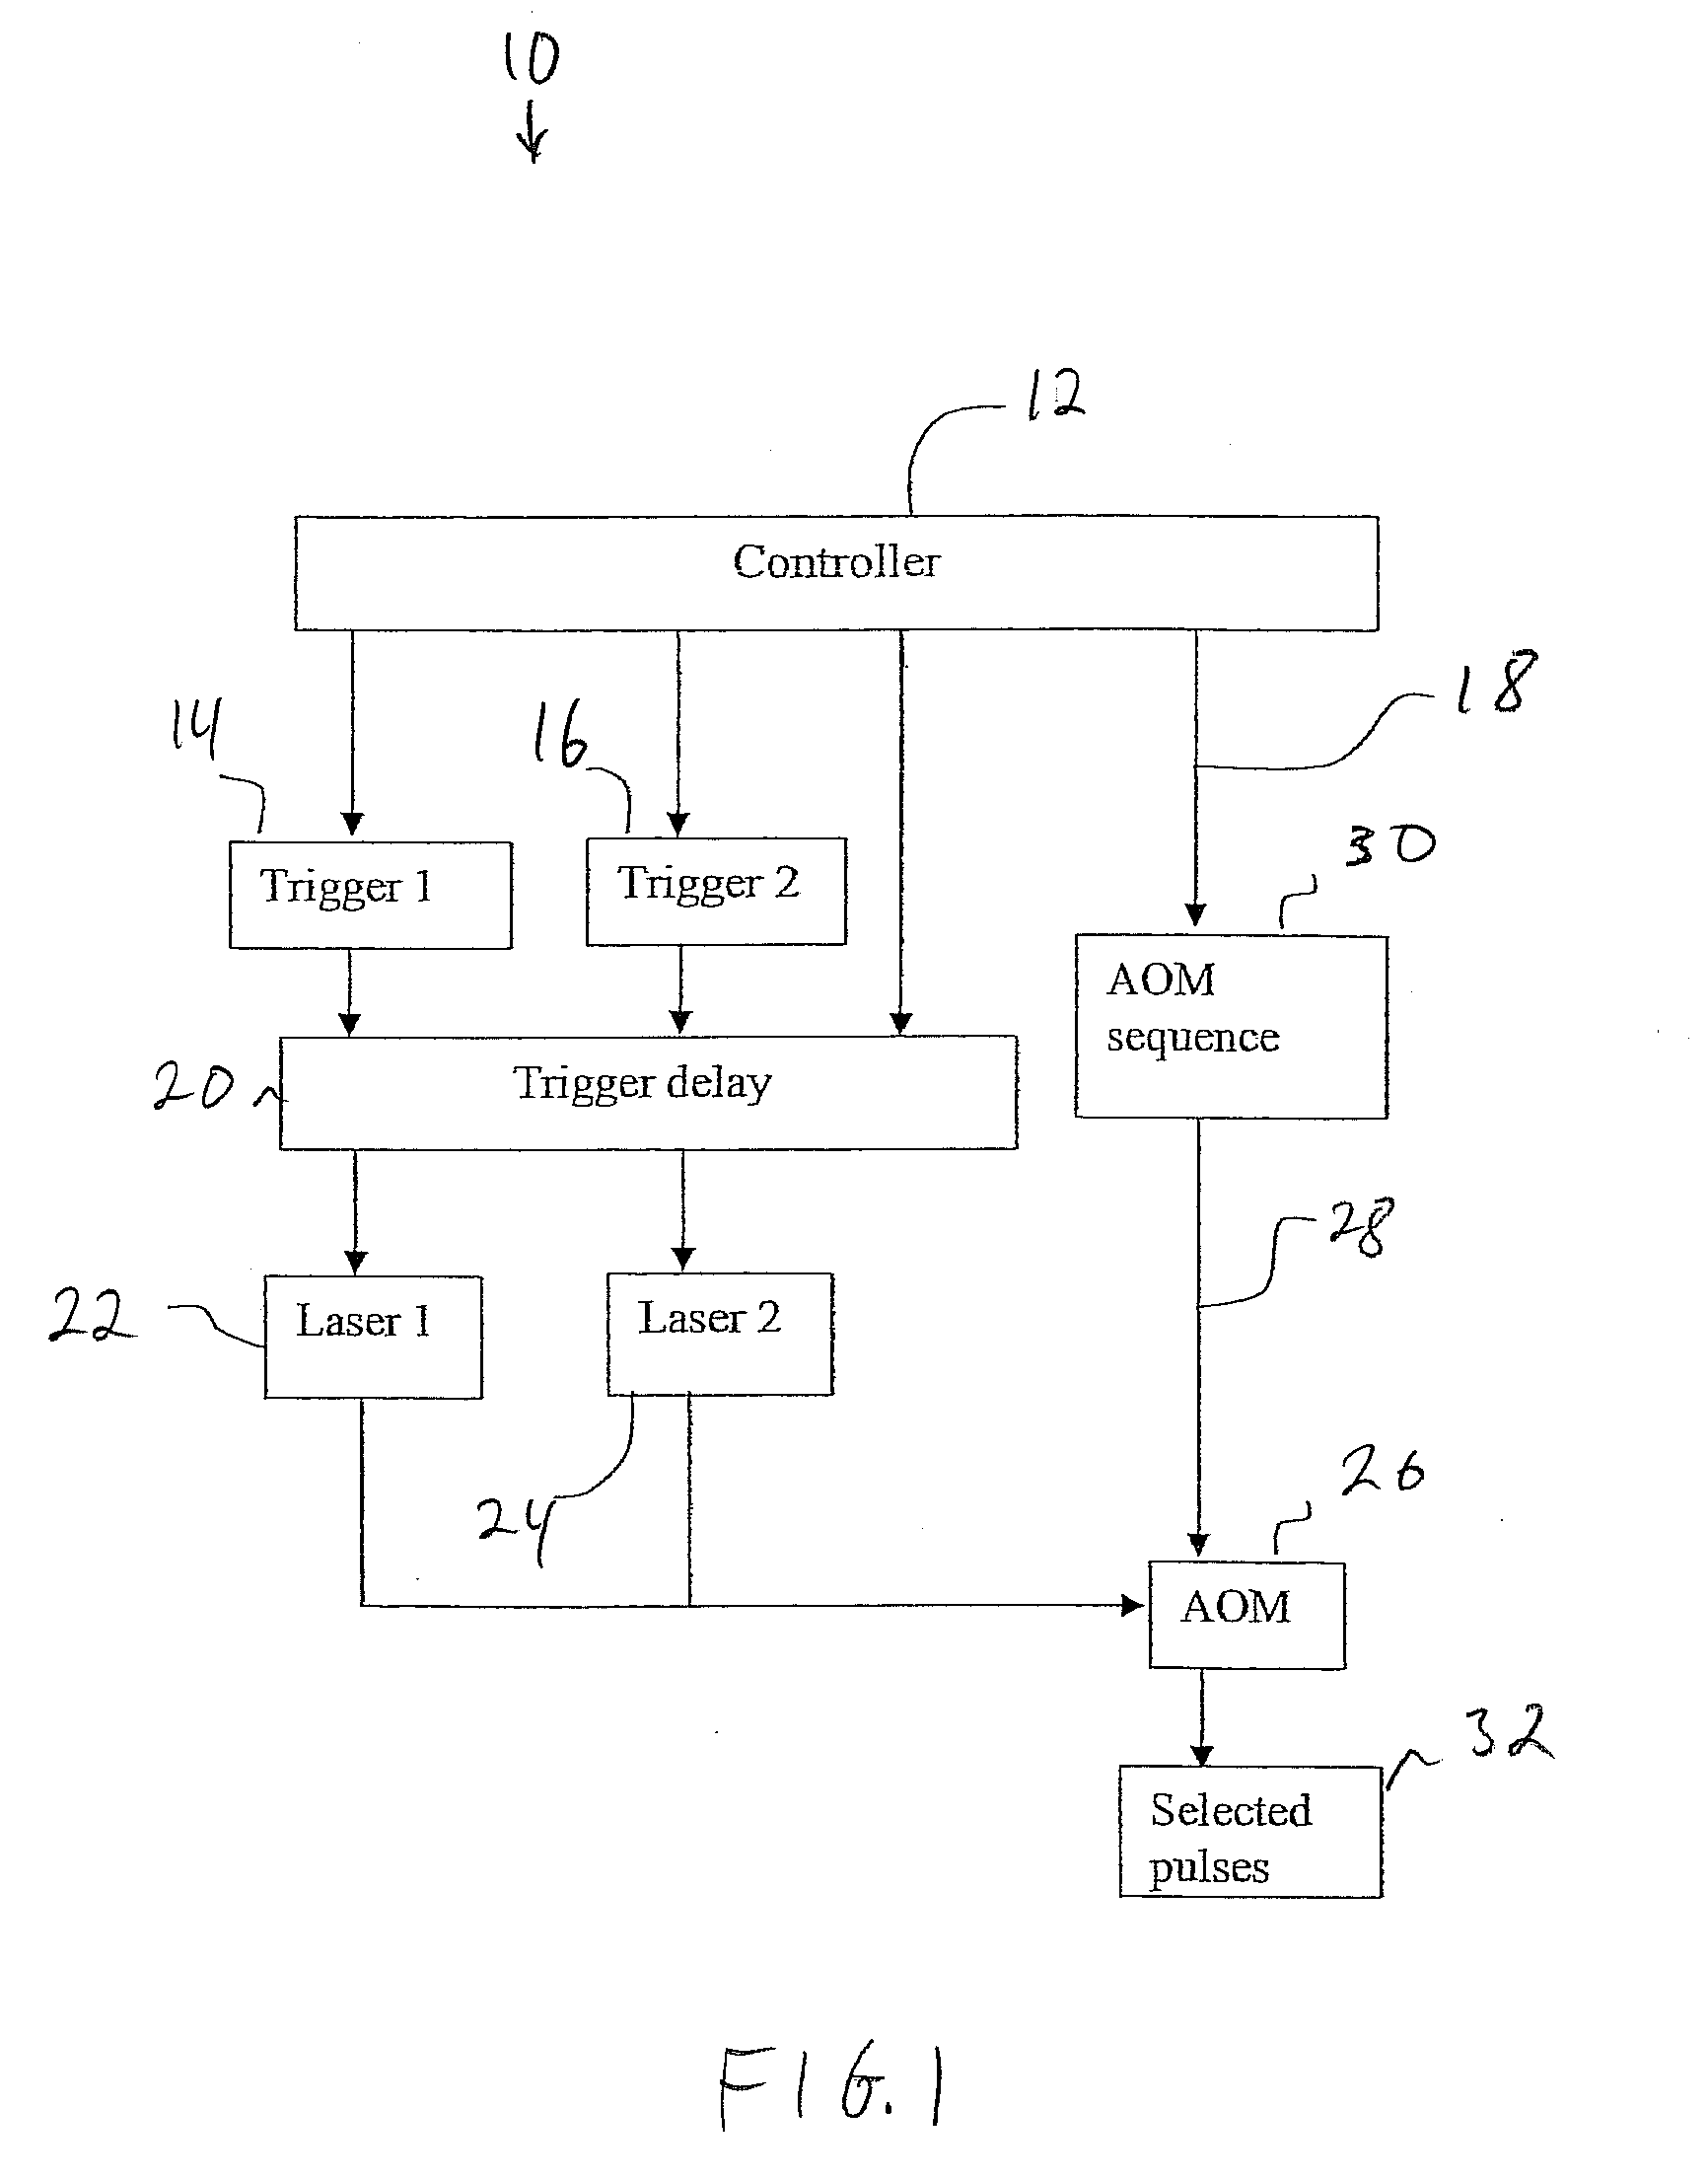 System and method for multi-pulse laser processing